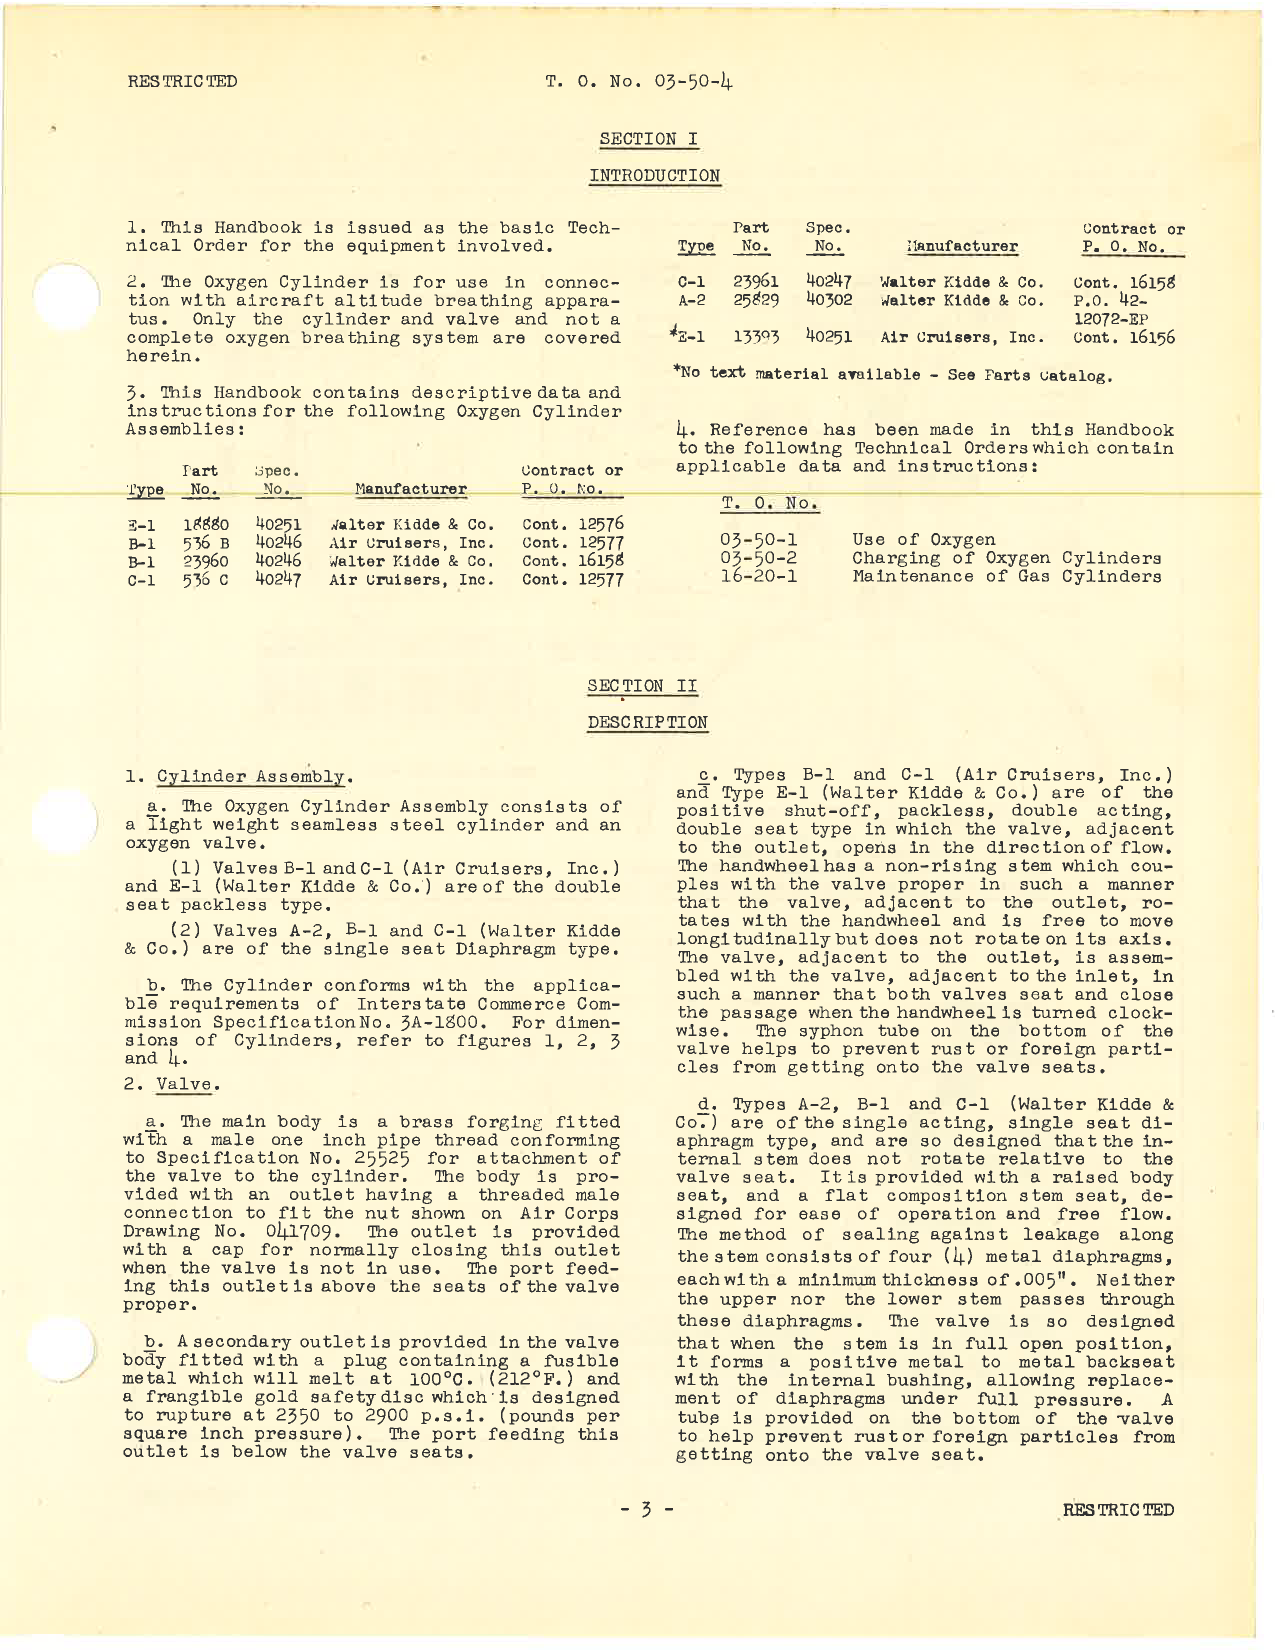 Sample page 5 from AirCorps Library document: Handbook of Instructions with Parts Catalog for Oxygen Cylinders